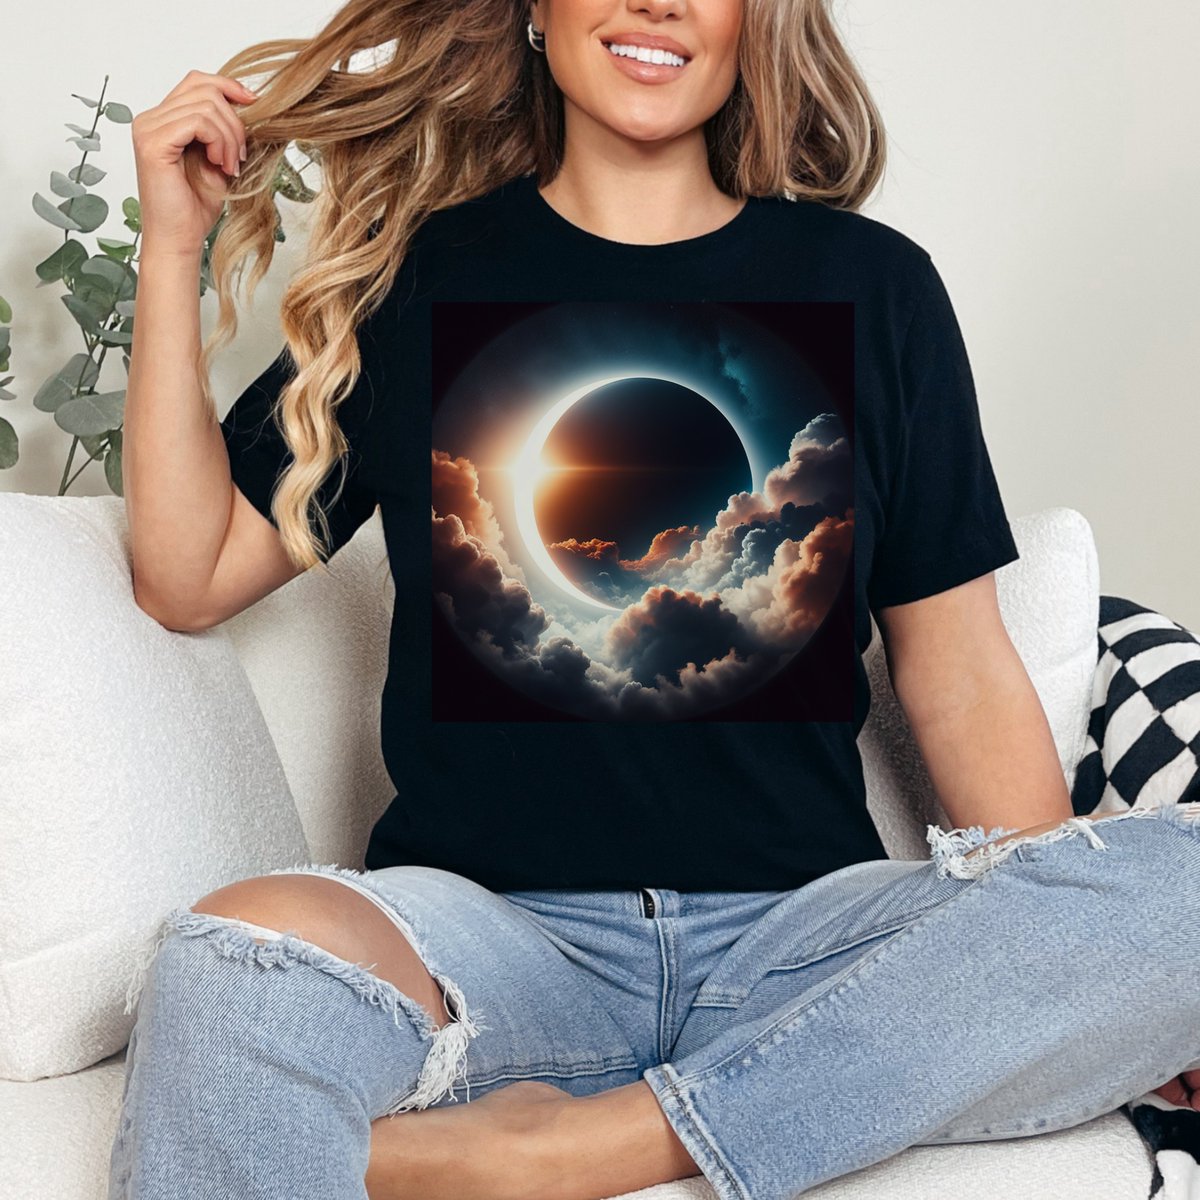 Total Eclipse T-shirt, Streetwear Inspired Shirt, Astronomy Tshirt, Celestial Tee, Eclipse Collectible T Shirt Gift for Astronomer etsy.me/49OB1rd #astronomyapparel #celestialshirt #cosmictshirt #eclipsecollectible #eclipseenthusiast #eclipseeventwear #eclipsesouvenir